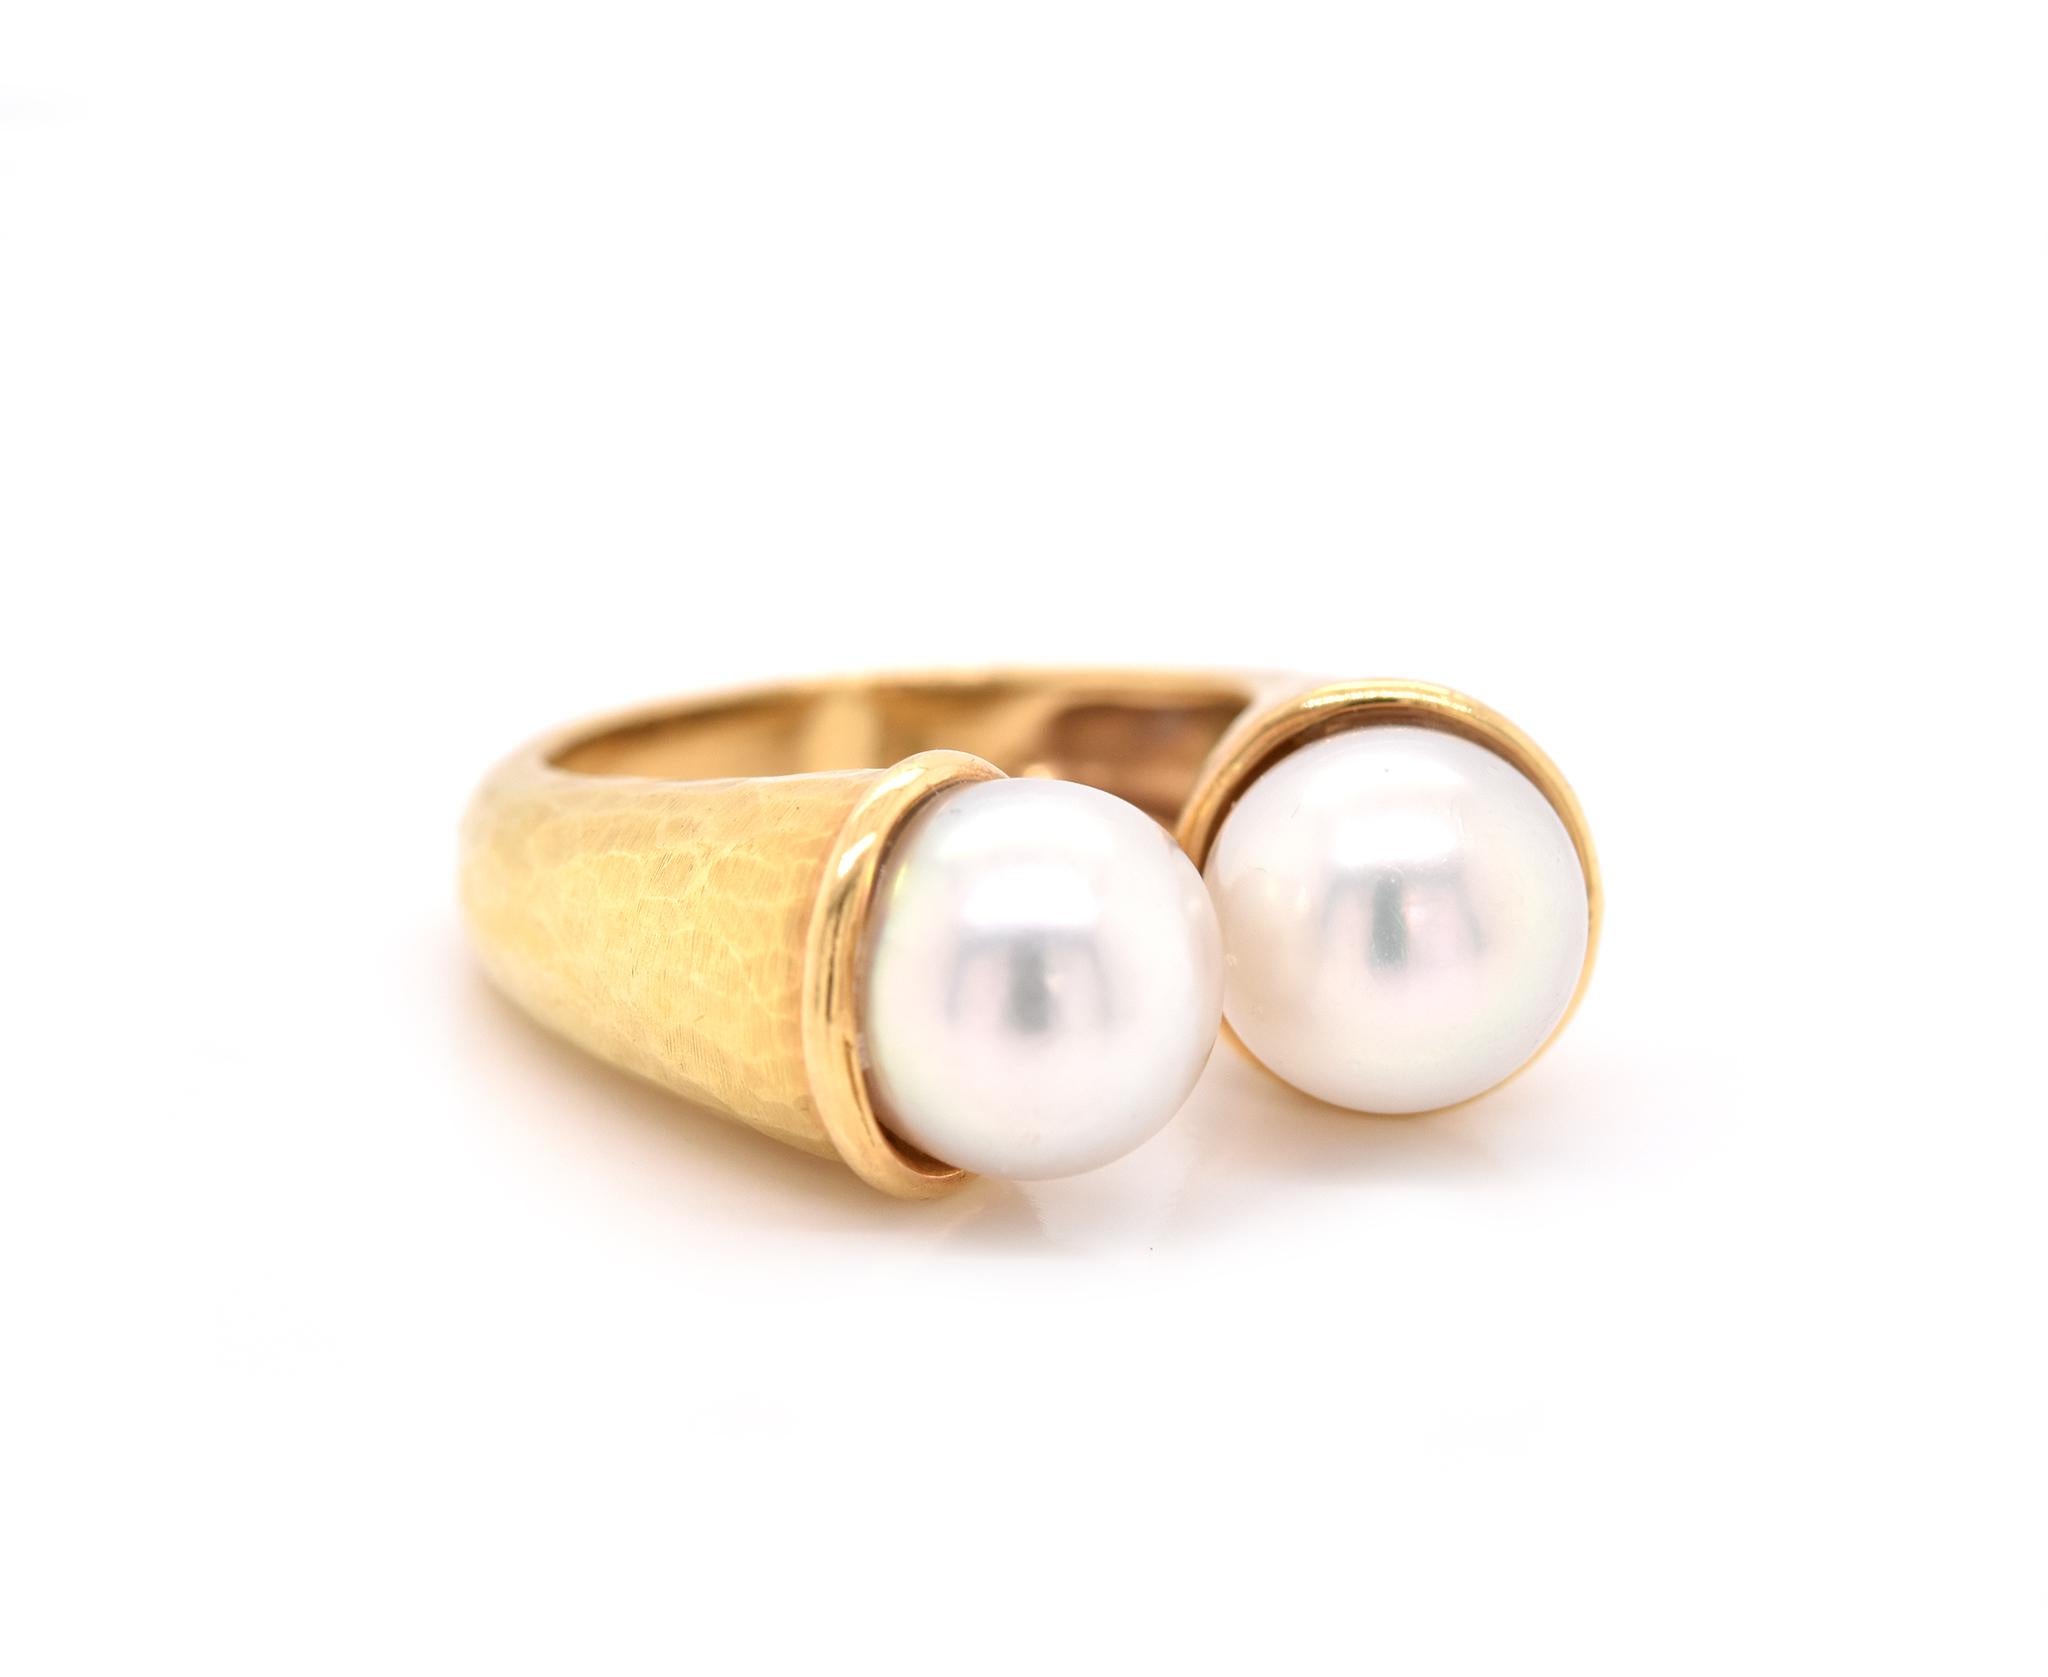 Material: 18k yellow gold
Pearl: 2 cultured pearls = 8.15mm
Ring Size: 5 (please allow two additional shipping days for sizing requests)
Dimensions: ring measures 22.00mm x 27.15mm
Weight: 9.19 grams